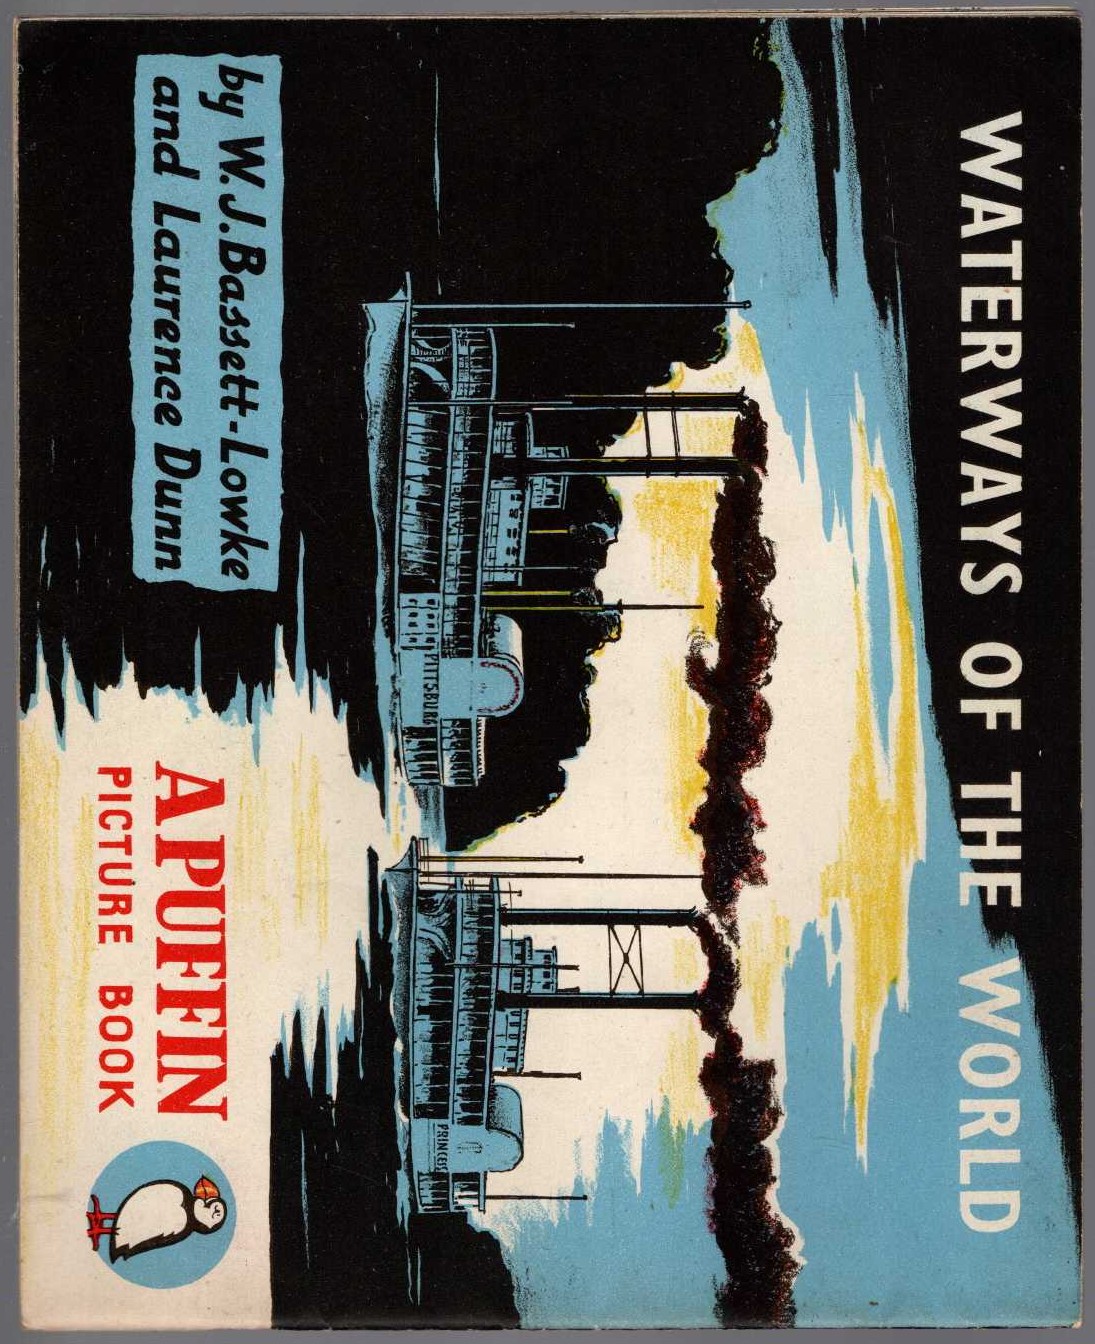 WATERWAYS OF THE WORLD magnified rear book cover image